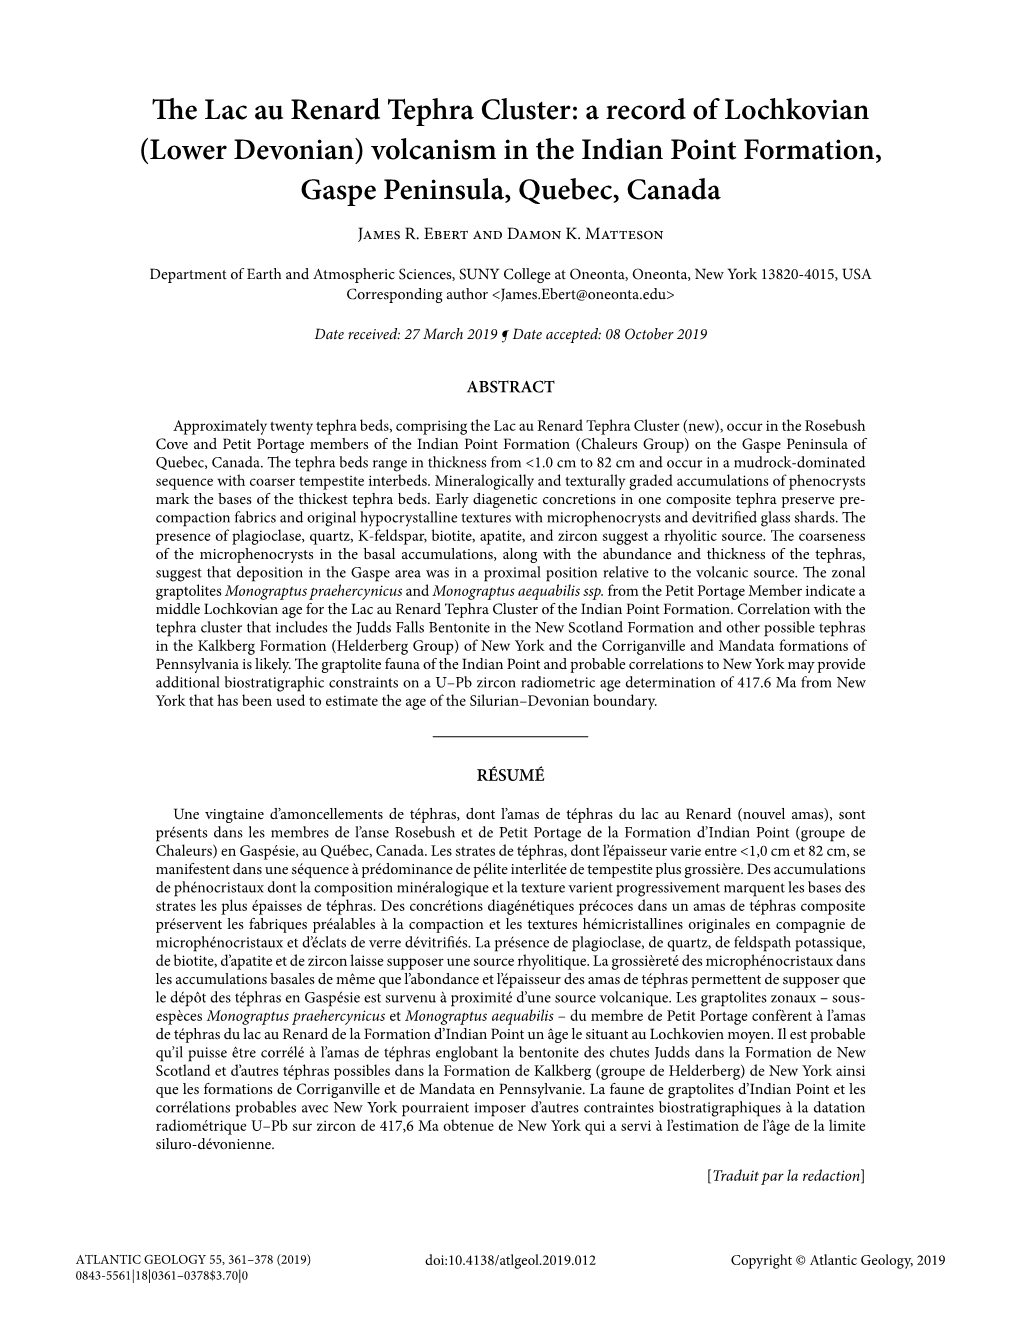 The Lac Au Renard Tephra Cluster: a Record of Lochkovian (Lower Devonian) Volcanism in the Indian Point Formation, Gaspe Peninsula, Quebec, Canada